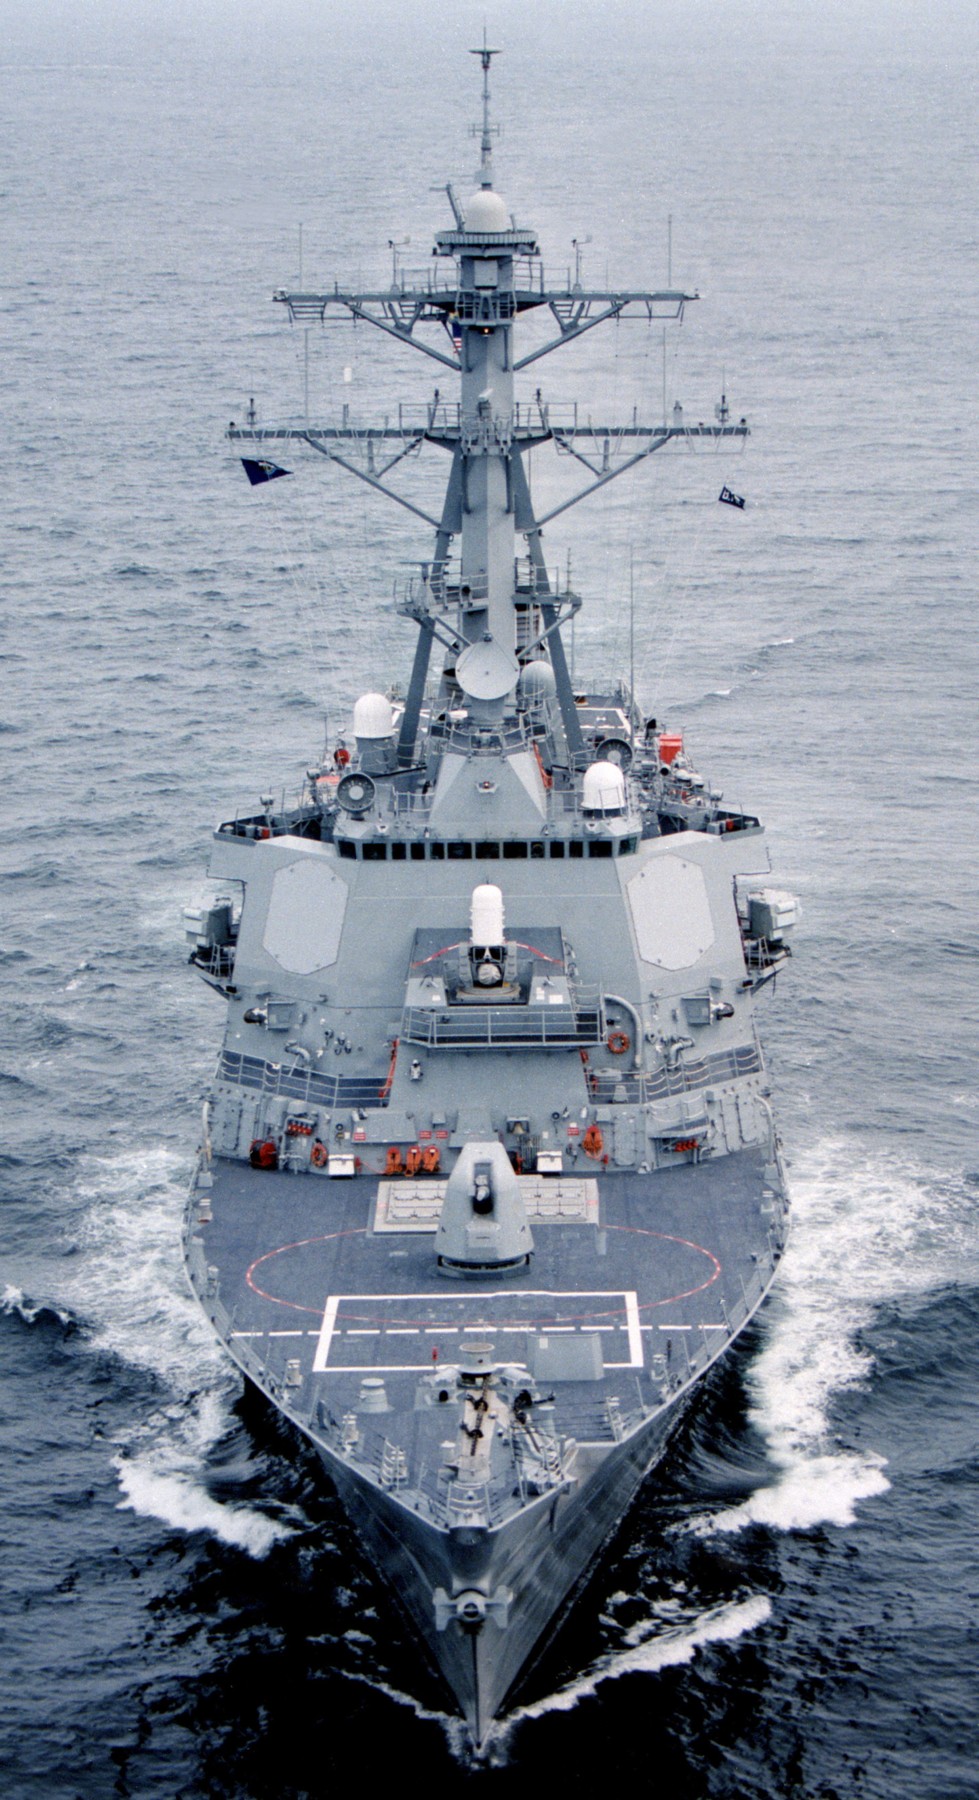 ddg-72 uss mahan guided missile destroyer arleigh burke class aegis bmd 51